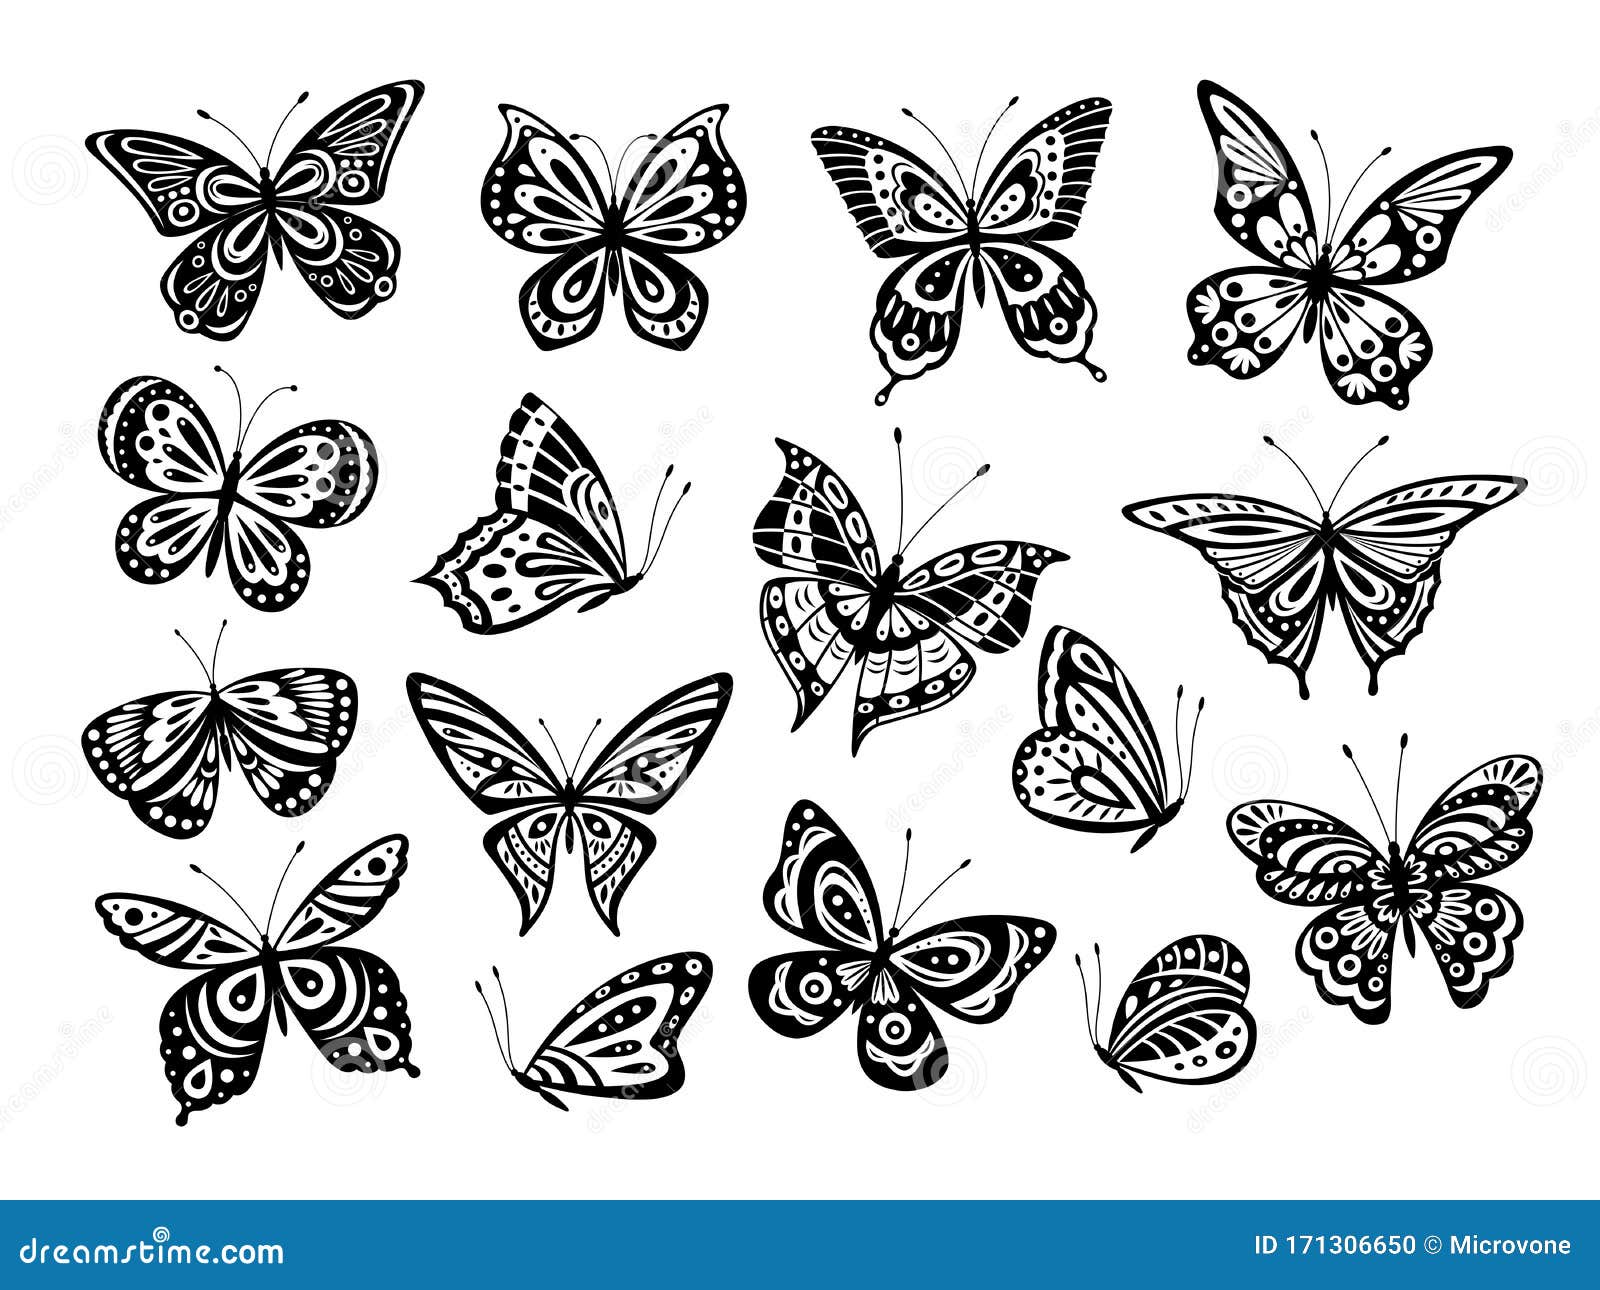 This is How to Draw a Butterfly in 10 Steps | Skillshare Blog